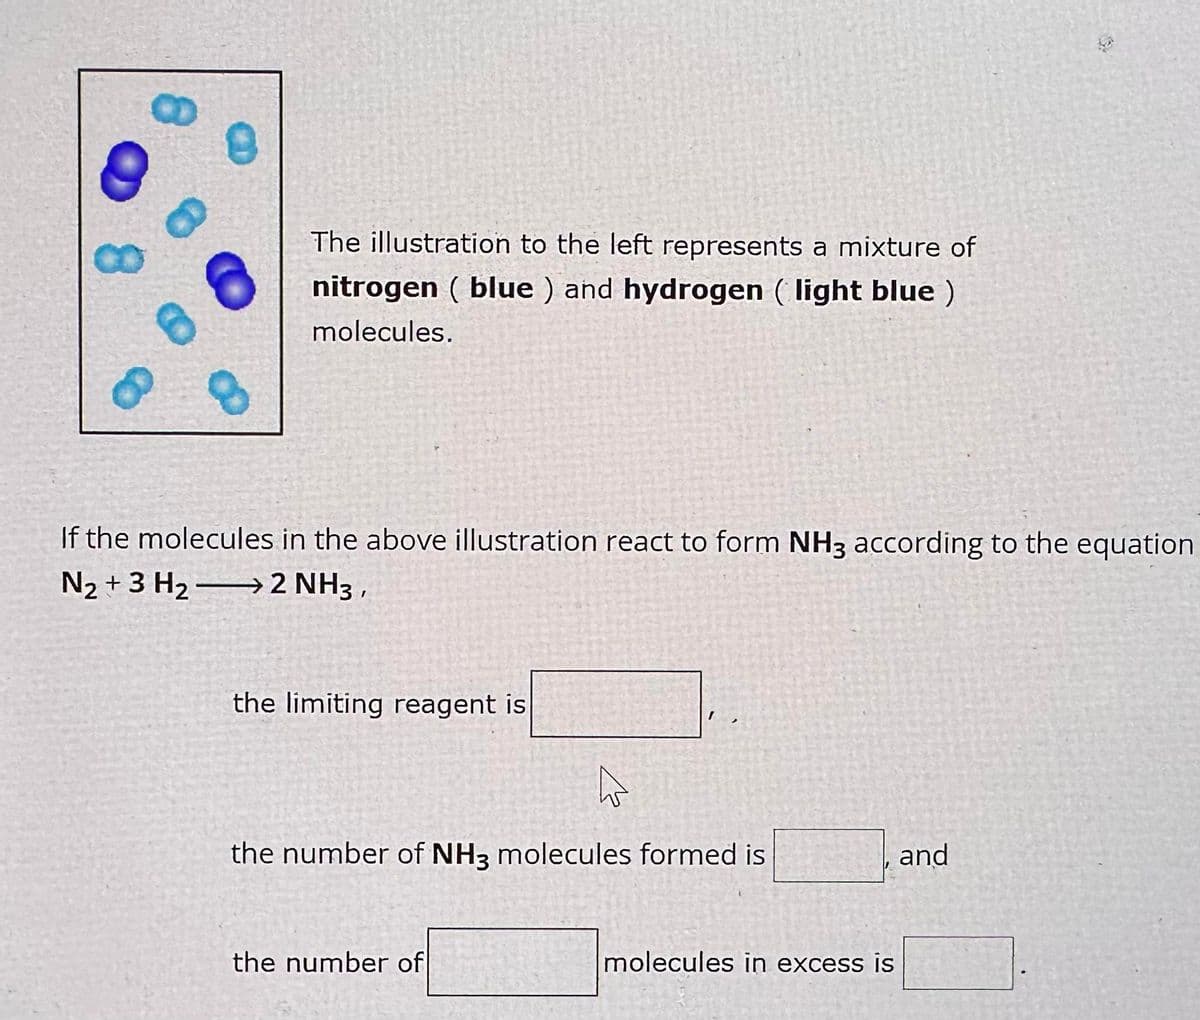 8
The illustration to the left represents a mixture of
nitrogen (blue) and hydrogen (light blue )
molecules.
If the molecules in the above illustration react to form NH3 according to the equation
N₂ + 3H₂ → 2 NH3,
the limiting reagent is
D
the number of NH3 molecules formed is
the number of
molecules in excess is
and